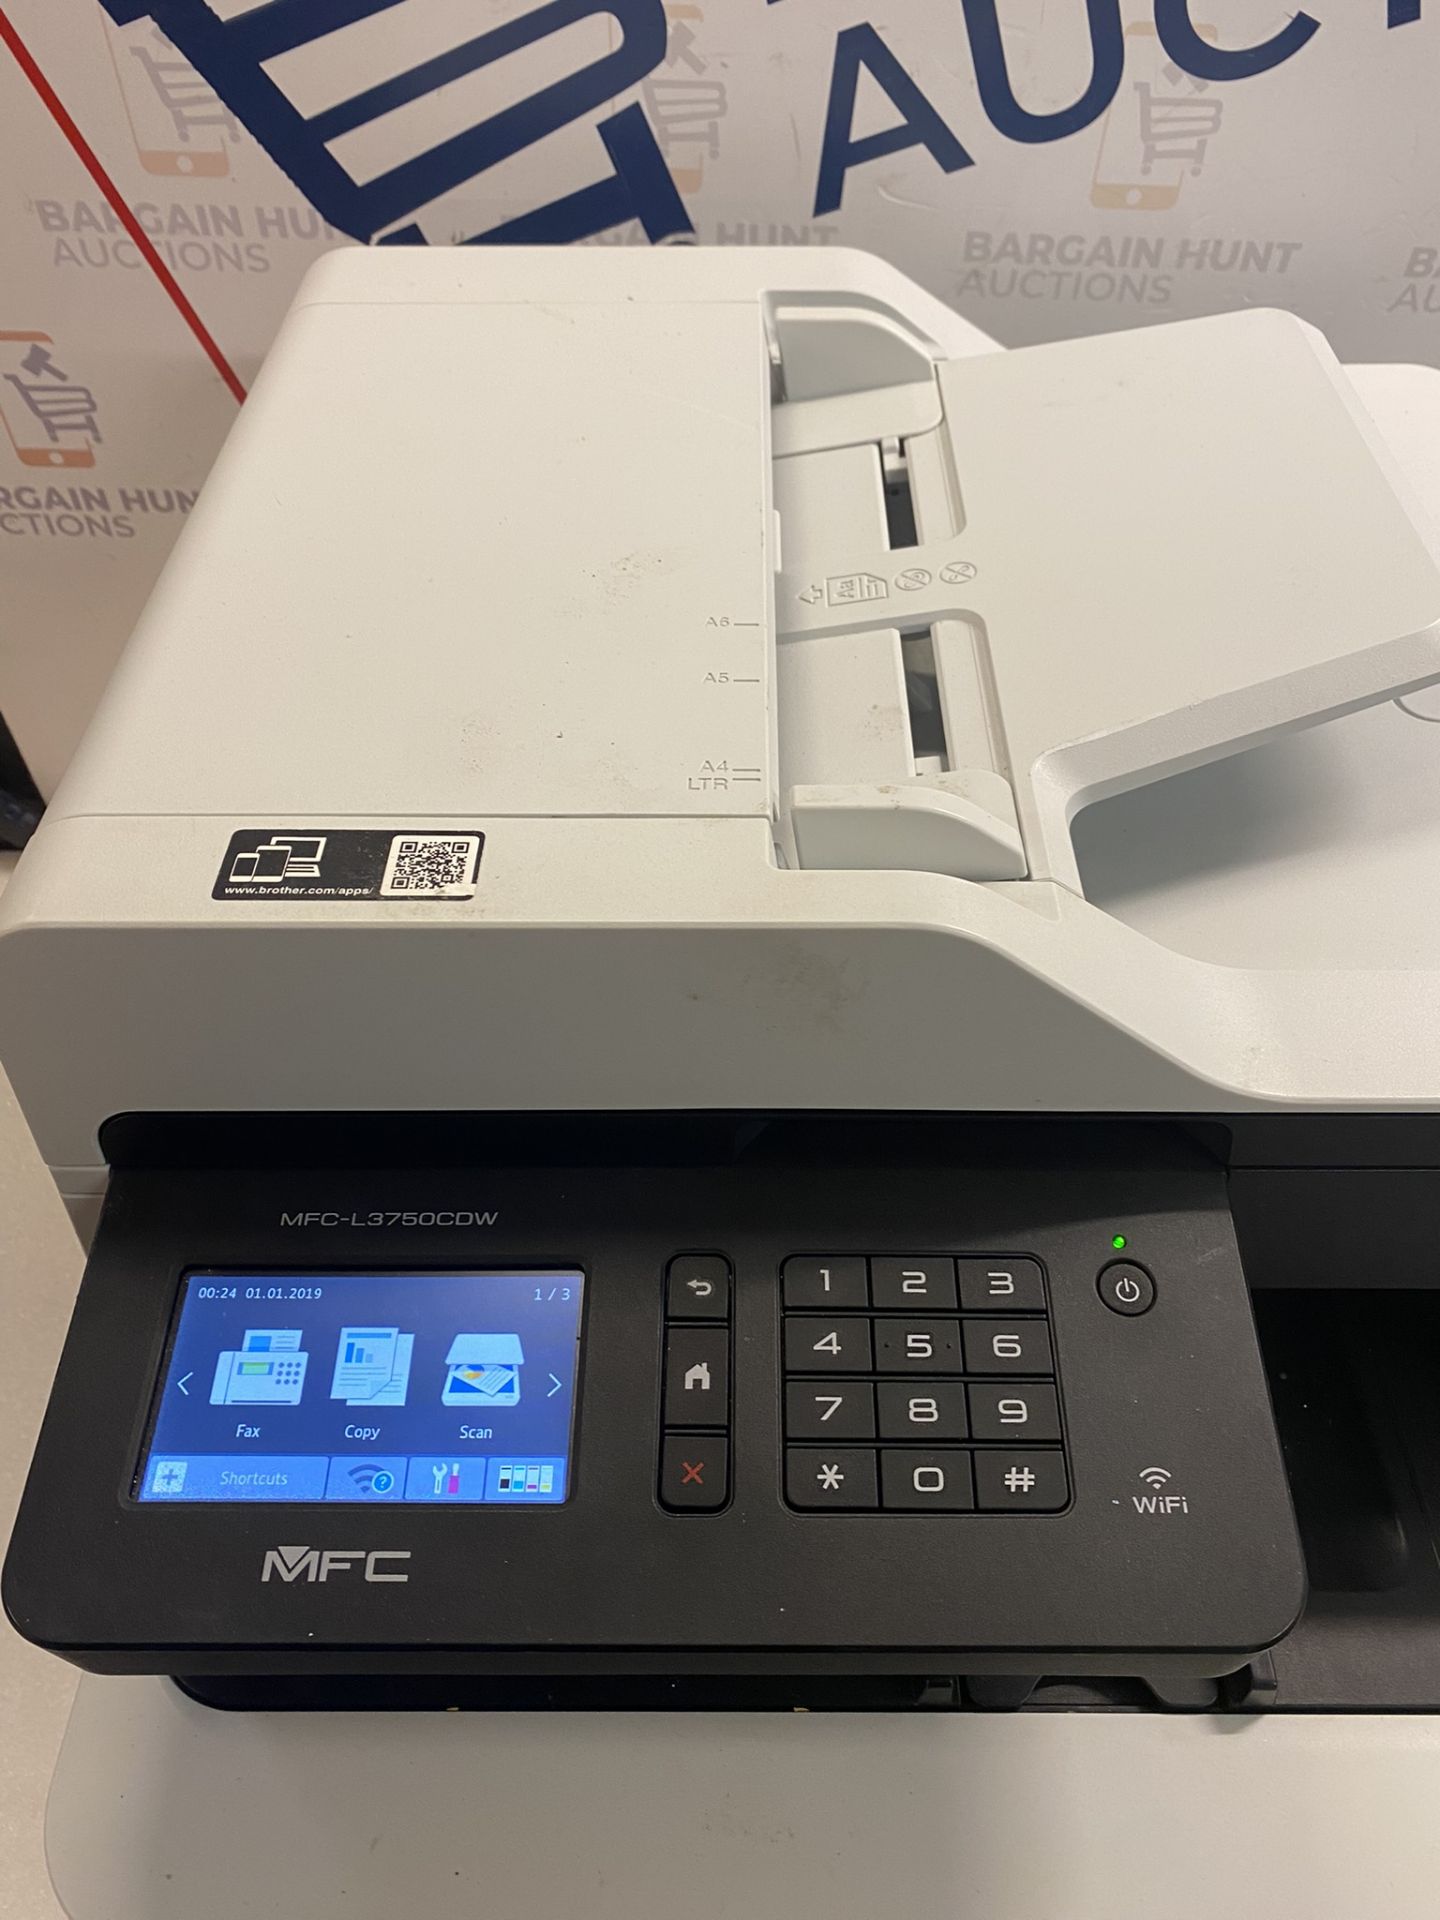 RRP £350 Brother MFC-L3750CDW A4 Colour Multifunction LED Laser Printer - Image 3 of 4